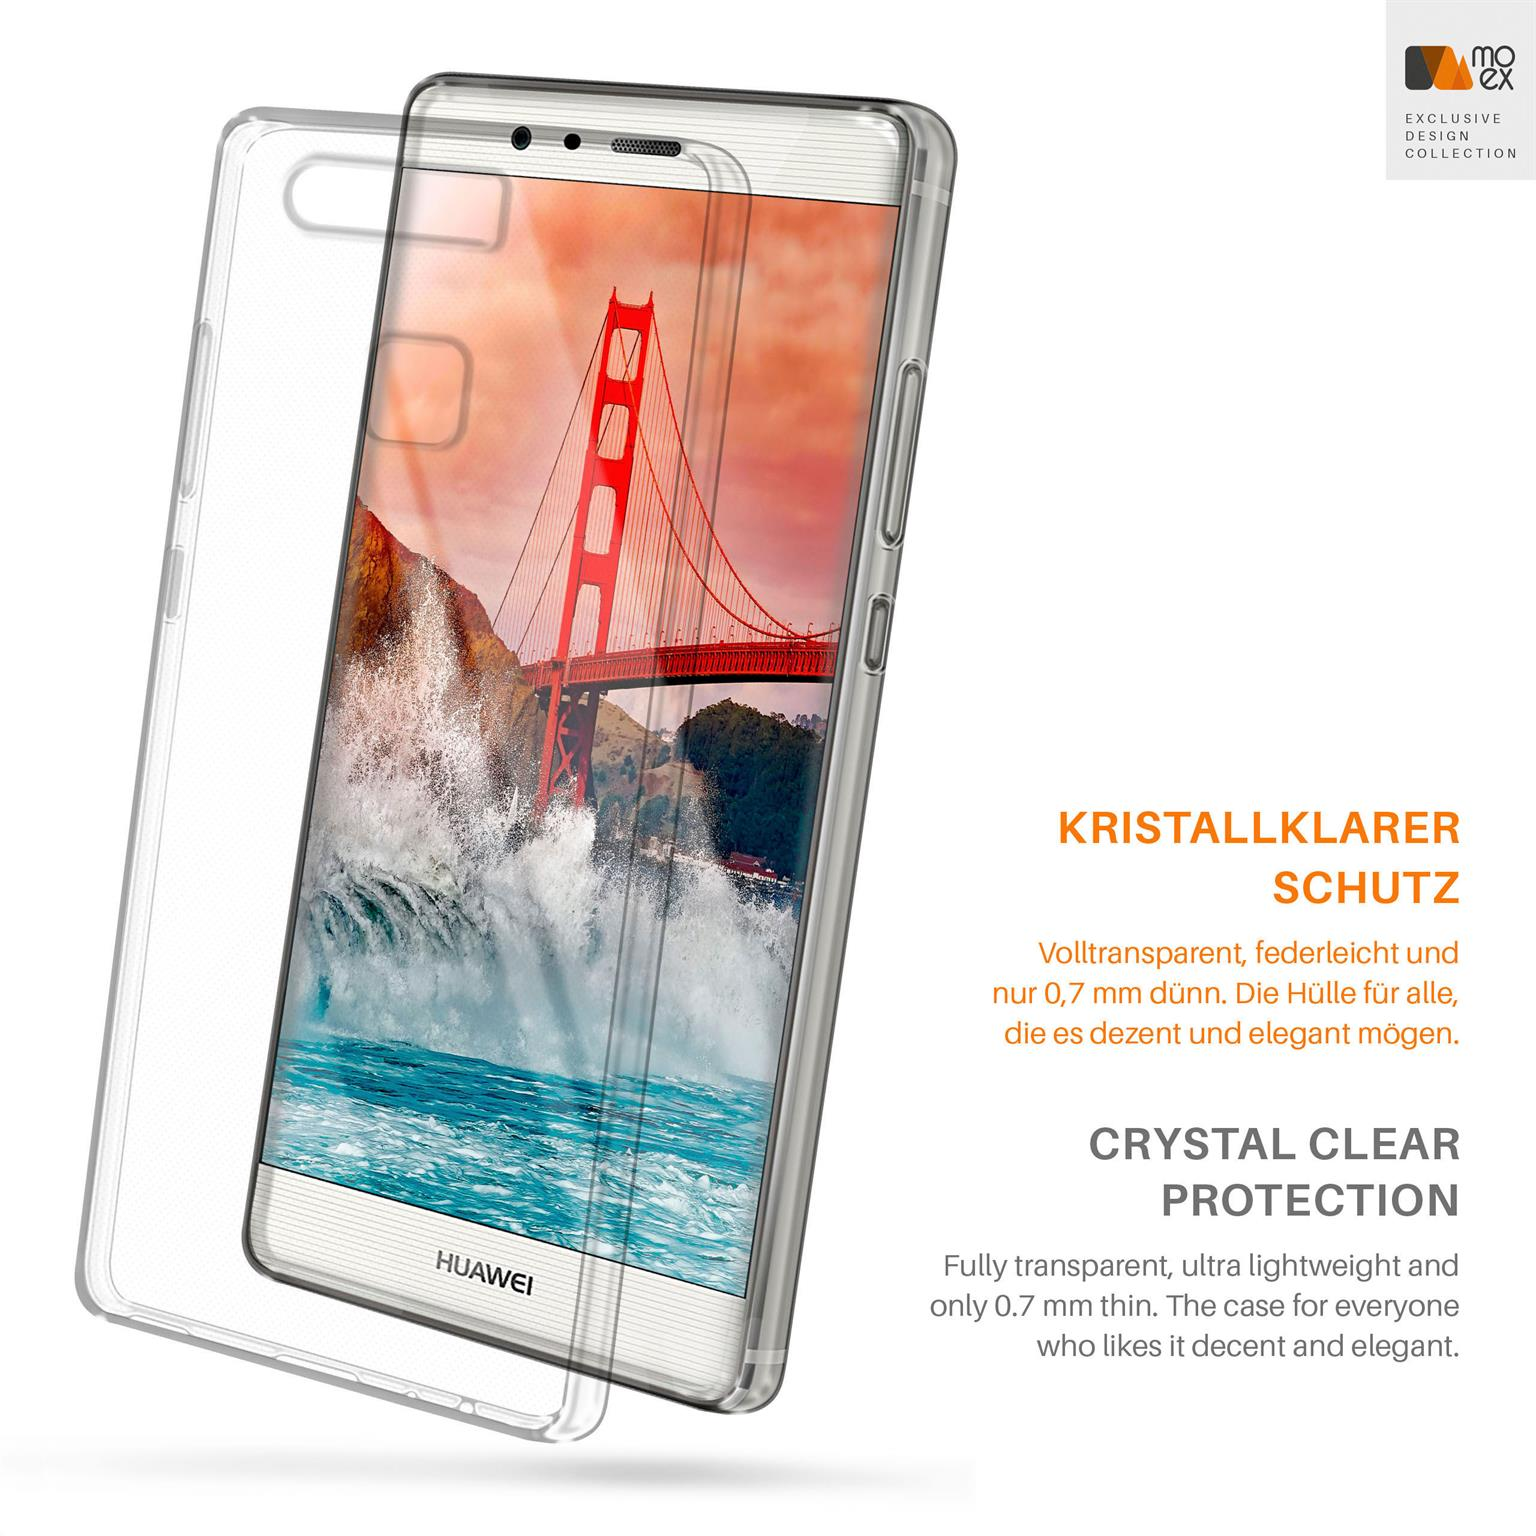 Huawei, Aero Crystal-Clear Backcover, P9, Case, MOEX